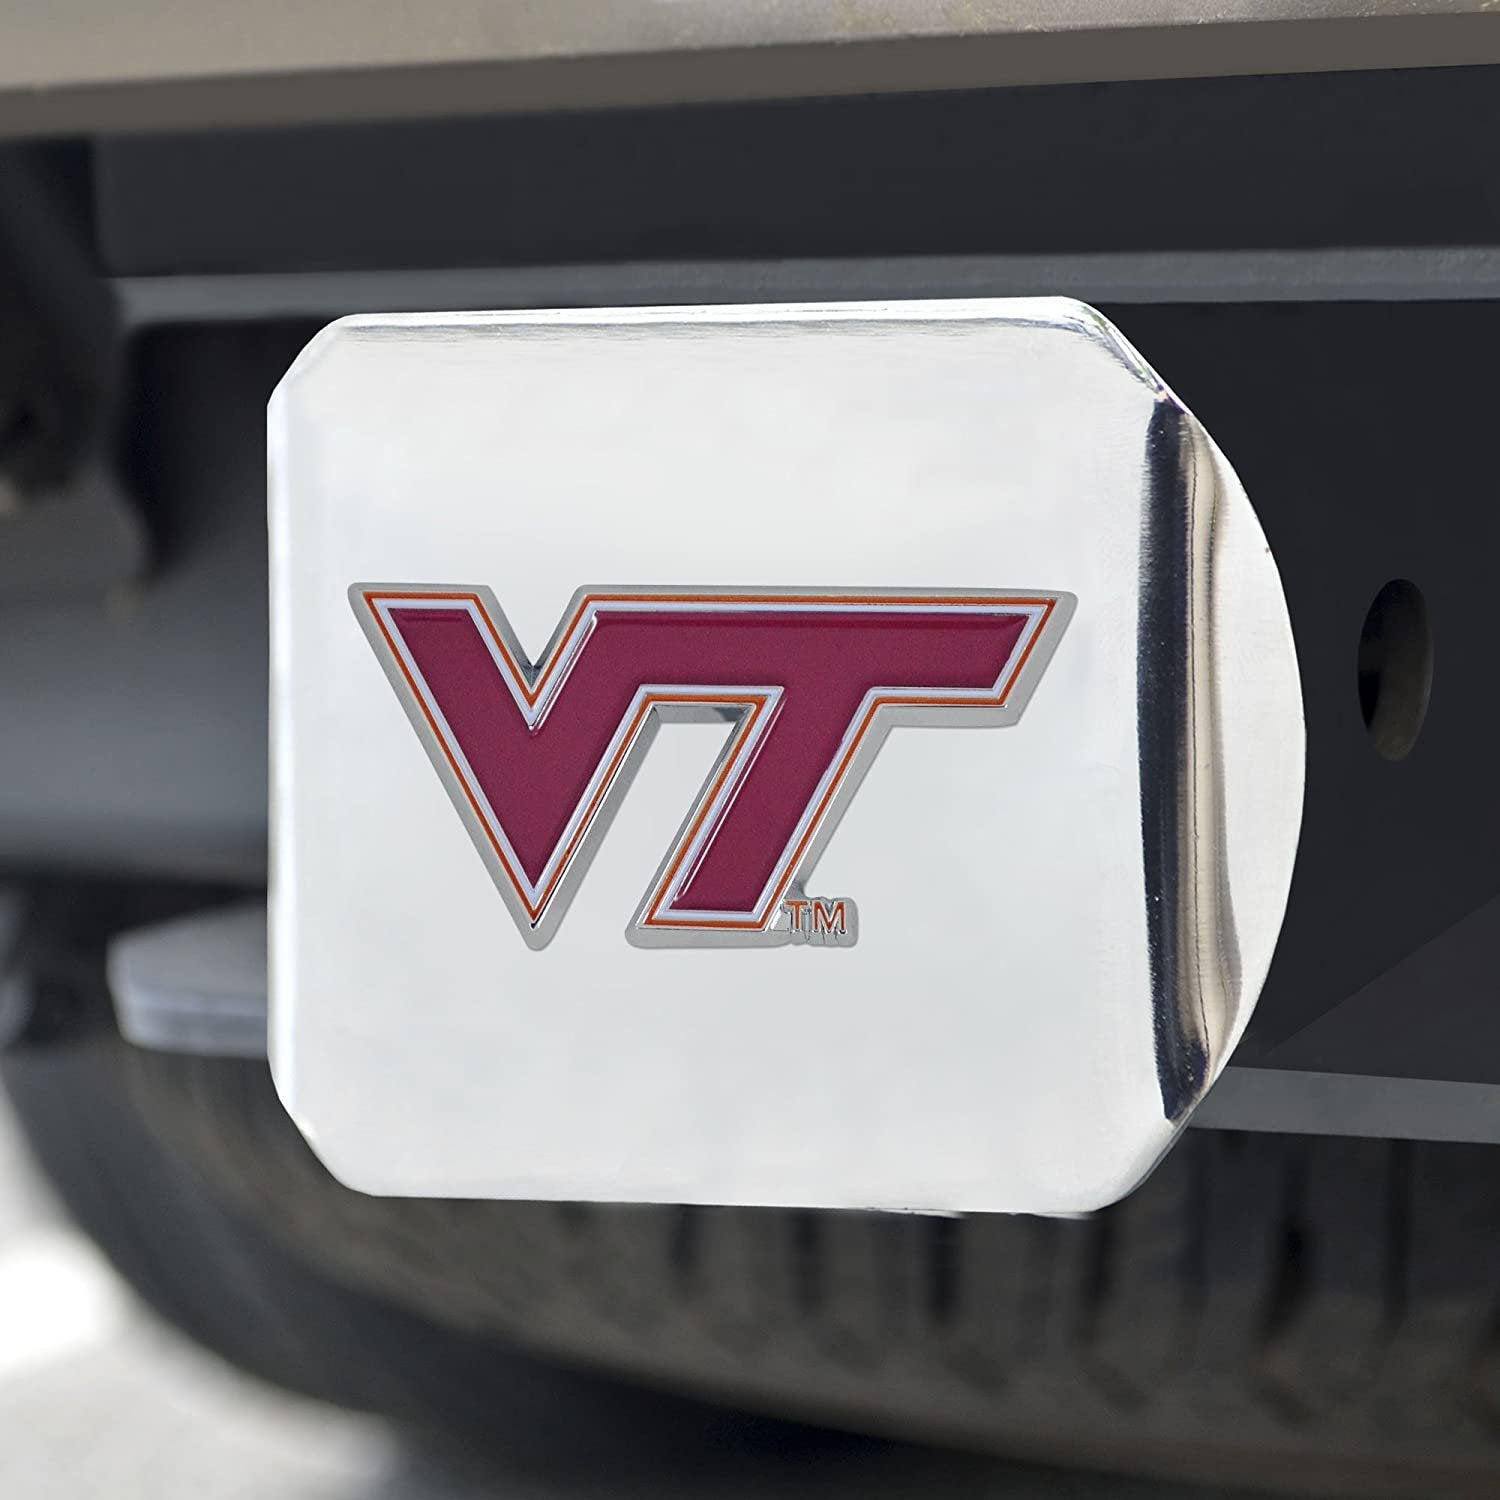 Virginia Tech Hokies Hitch Cover Solid Metal with Raised Color Metal Emblem 2" Square Type III University